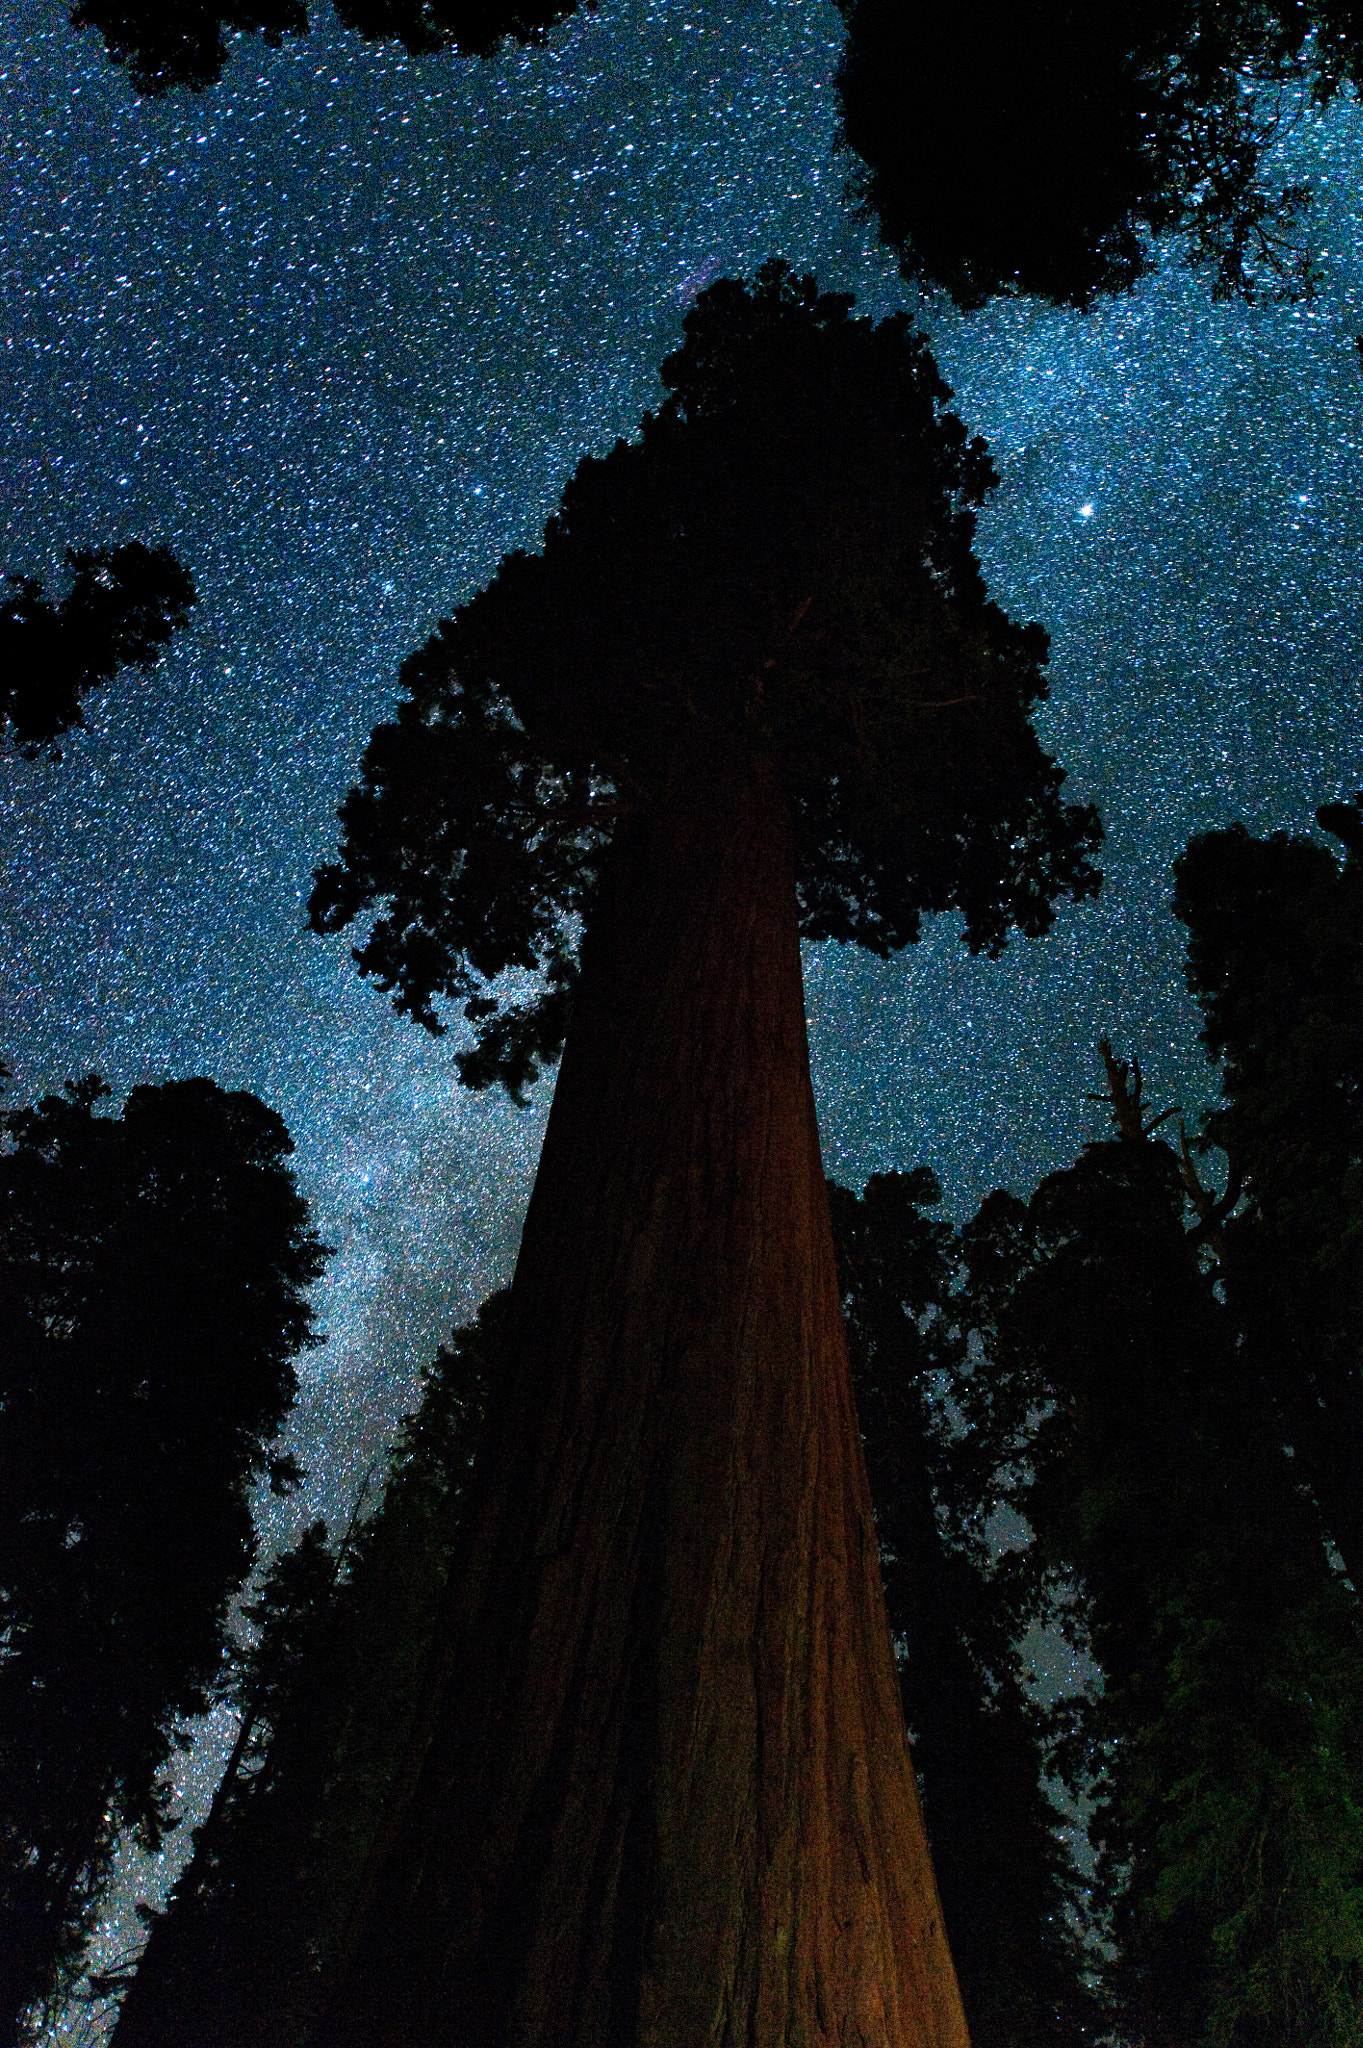 The Oregon Tree and the Milky Way